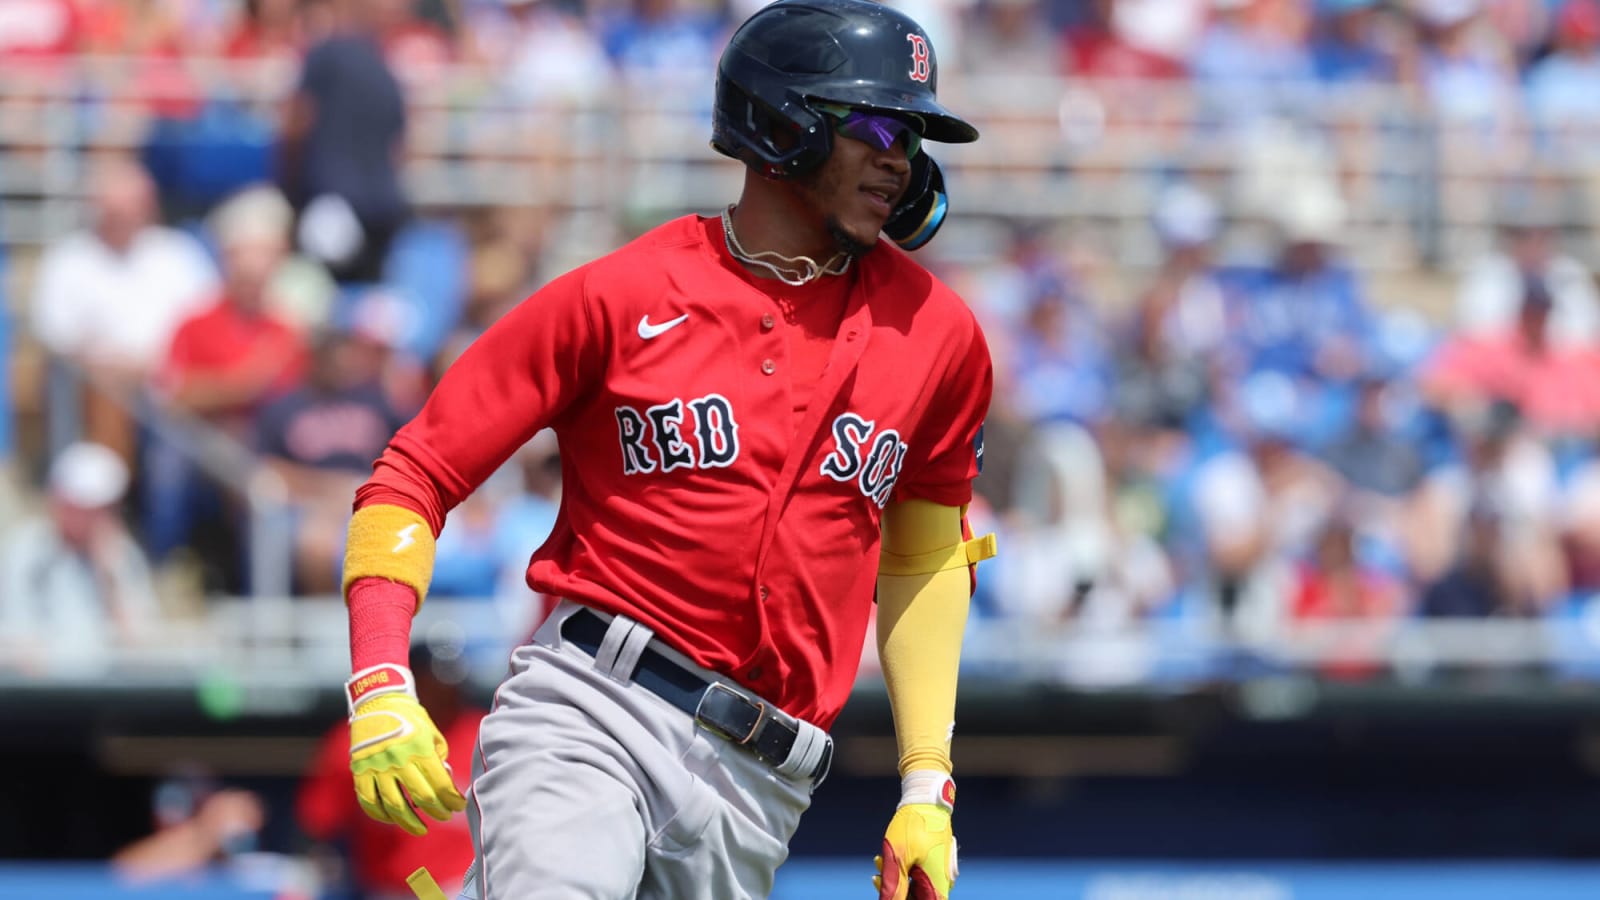 Red Sox outfield prospect Miguel Bleis shows flashes of his potential in first Grapefruit League start